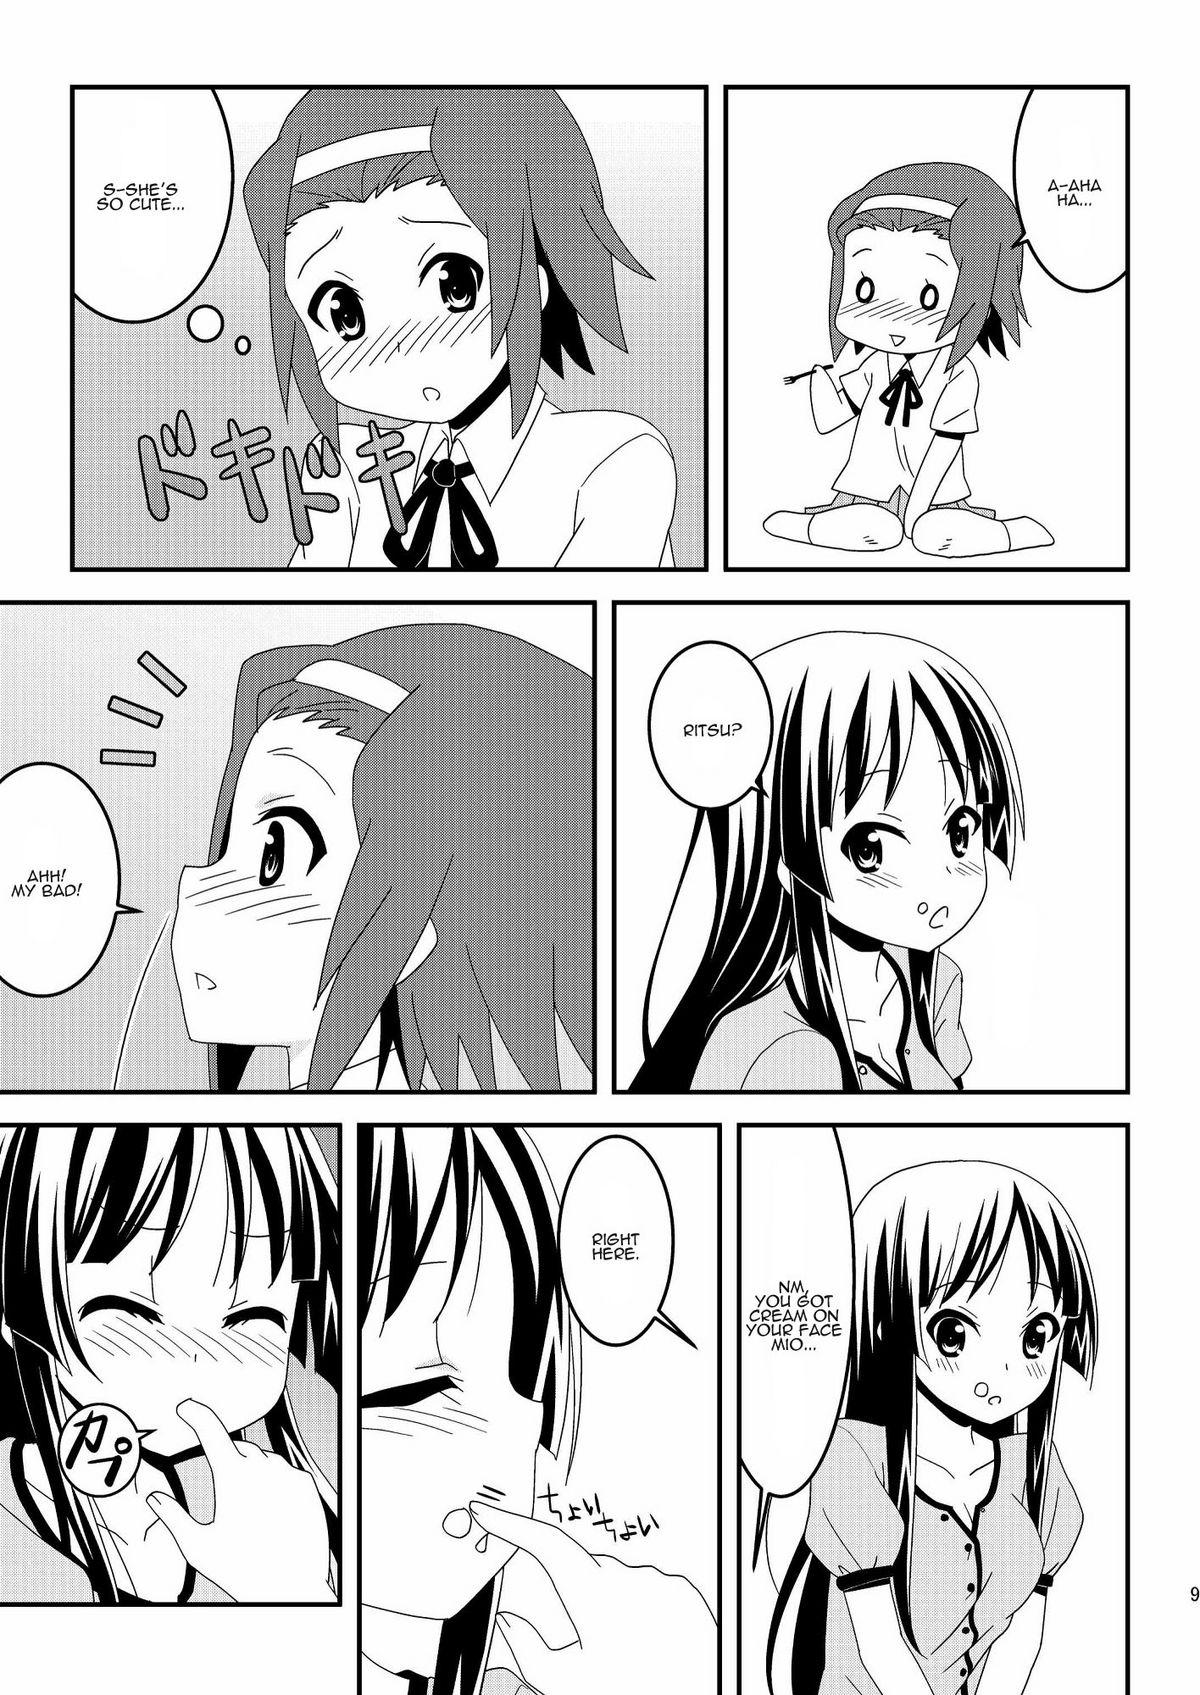 Publico Sweet Sweet - K-on Sharing - Page 9